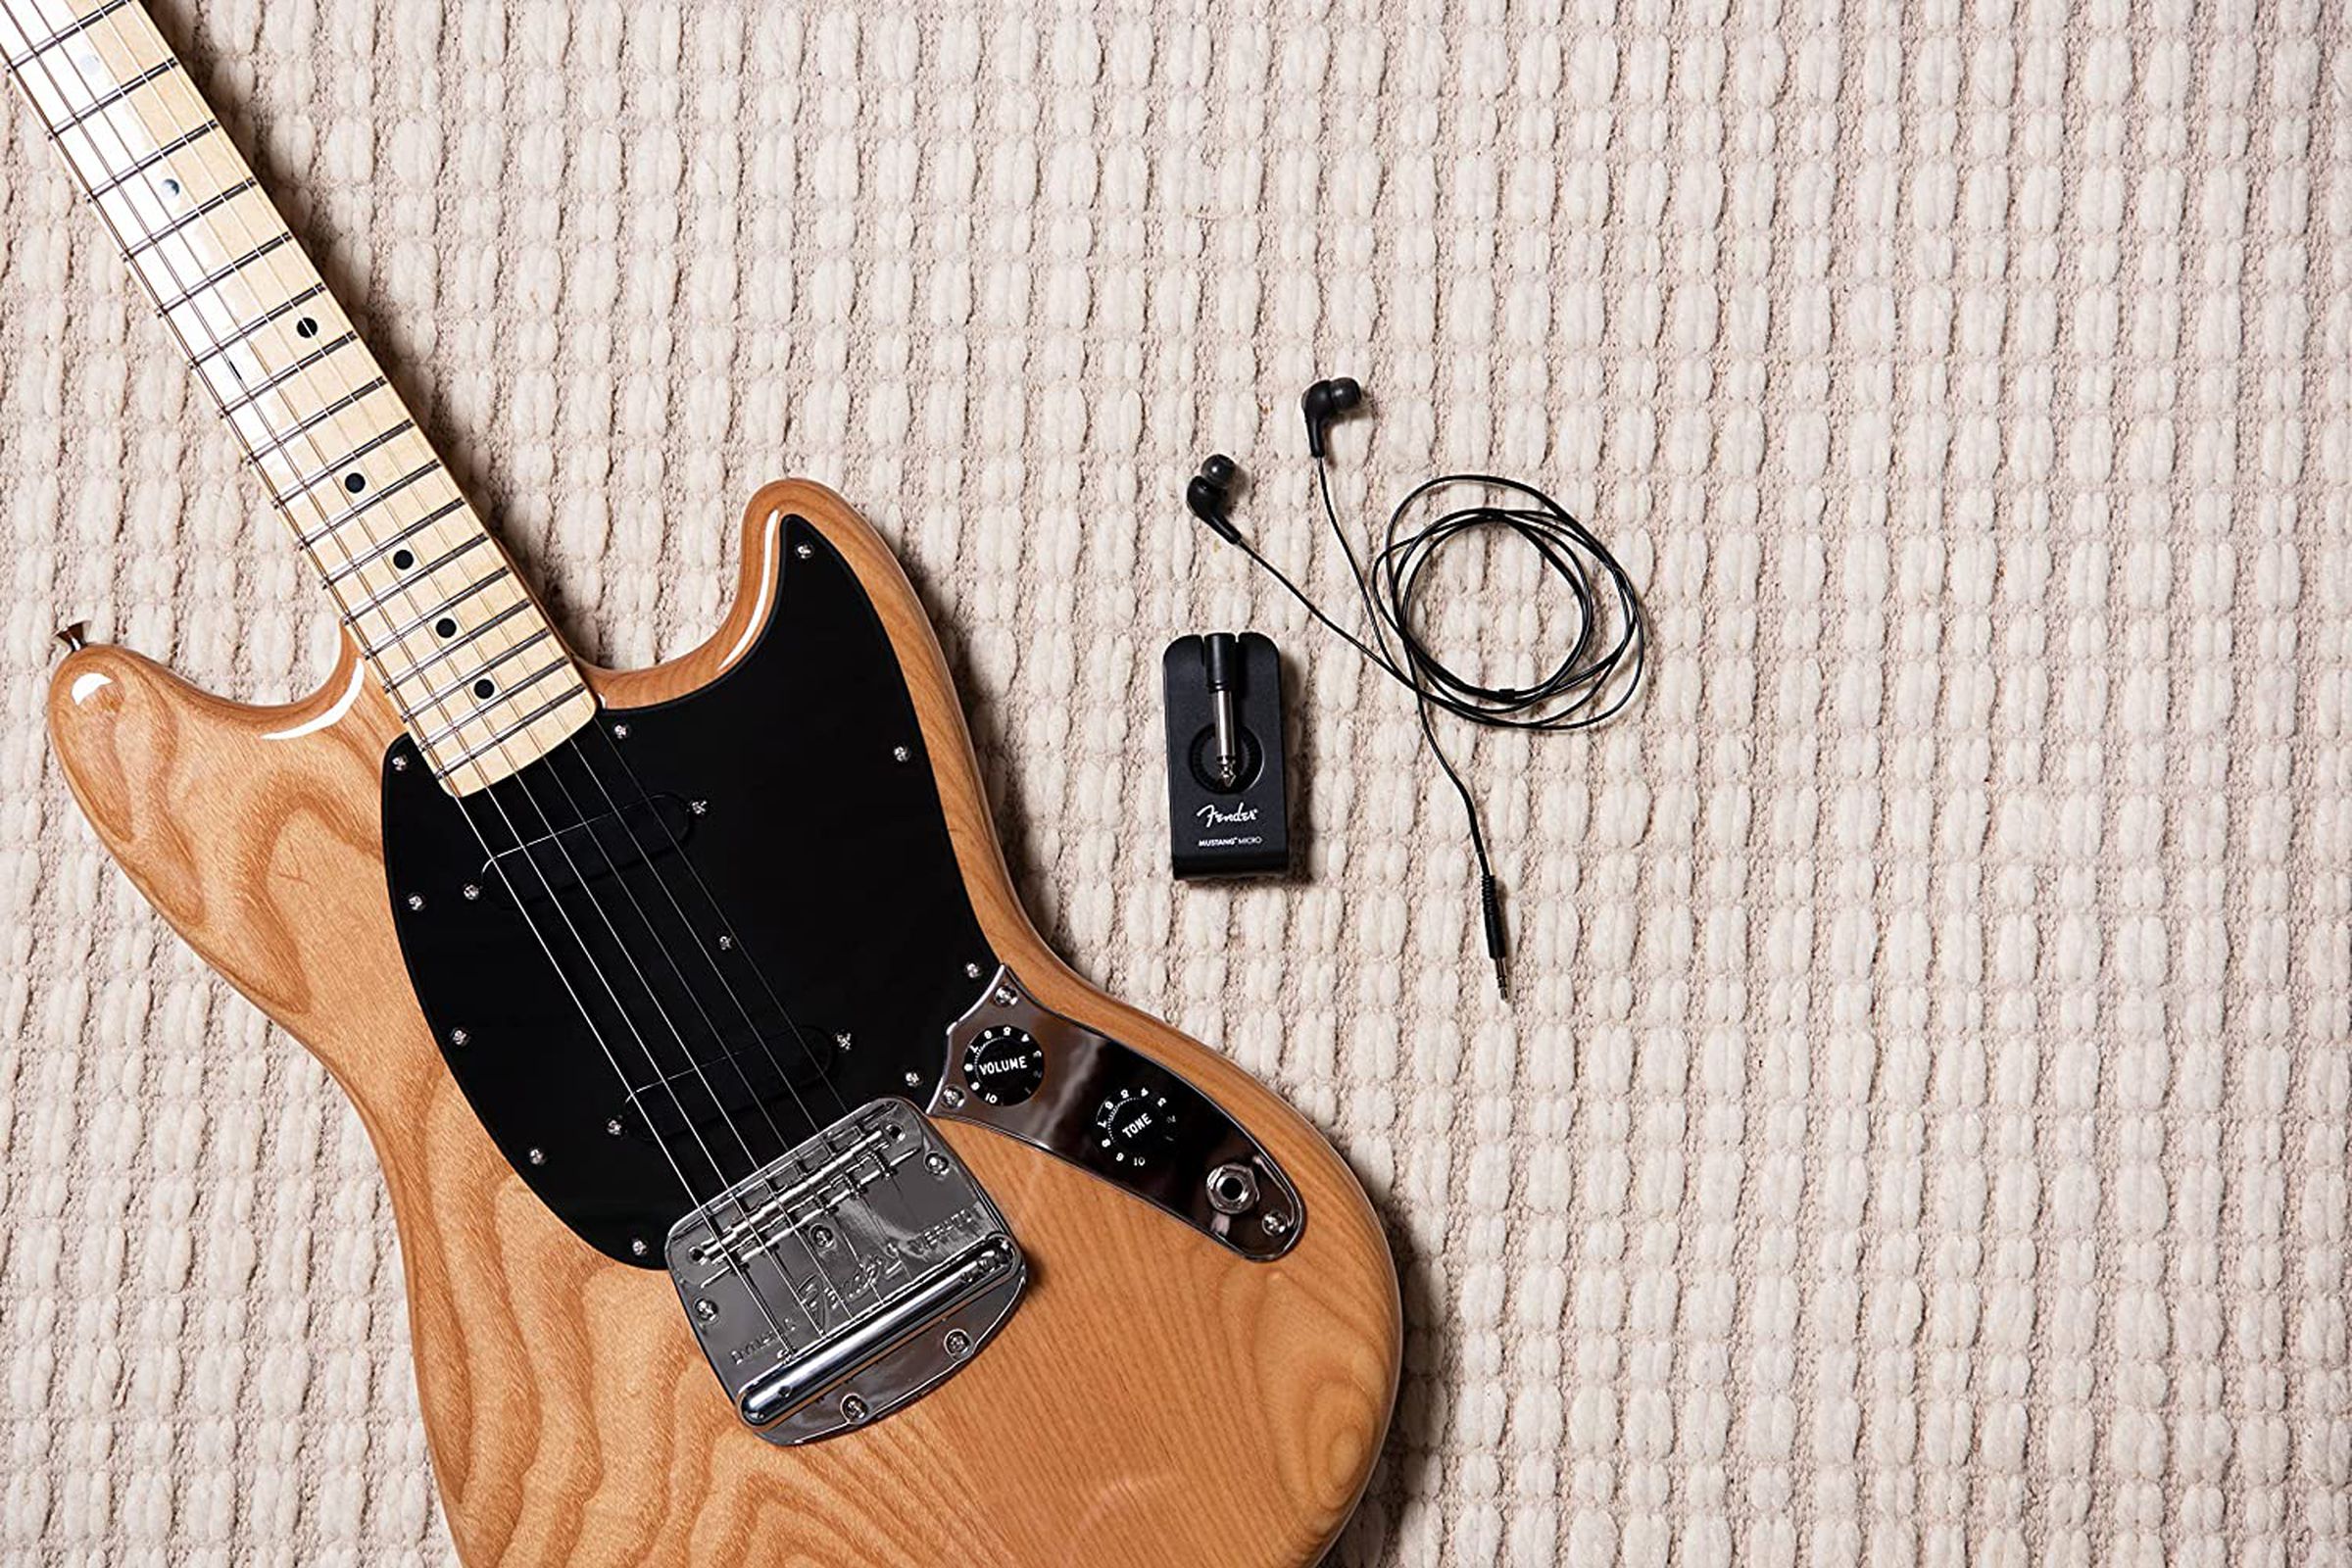 Small headphone amplifier to the left of an electric guitar.